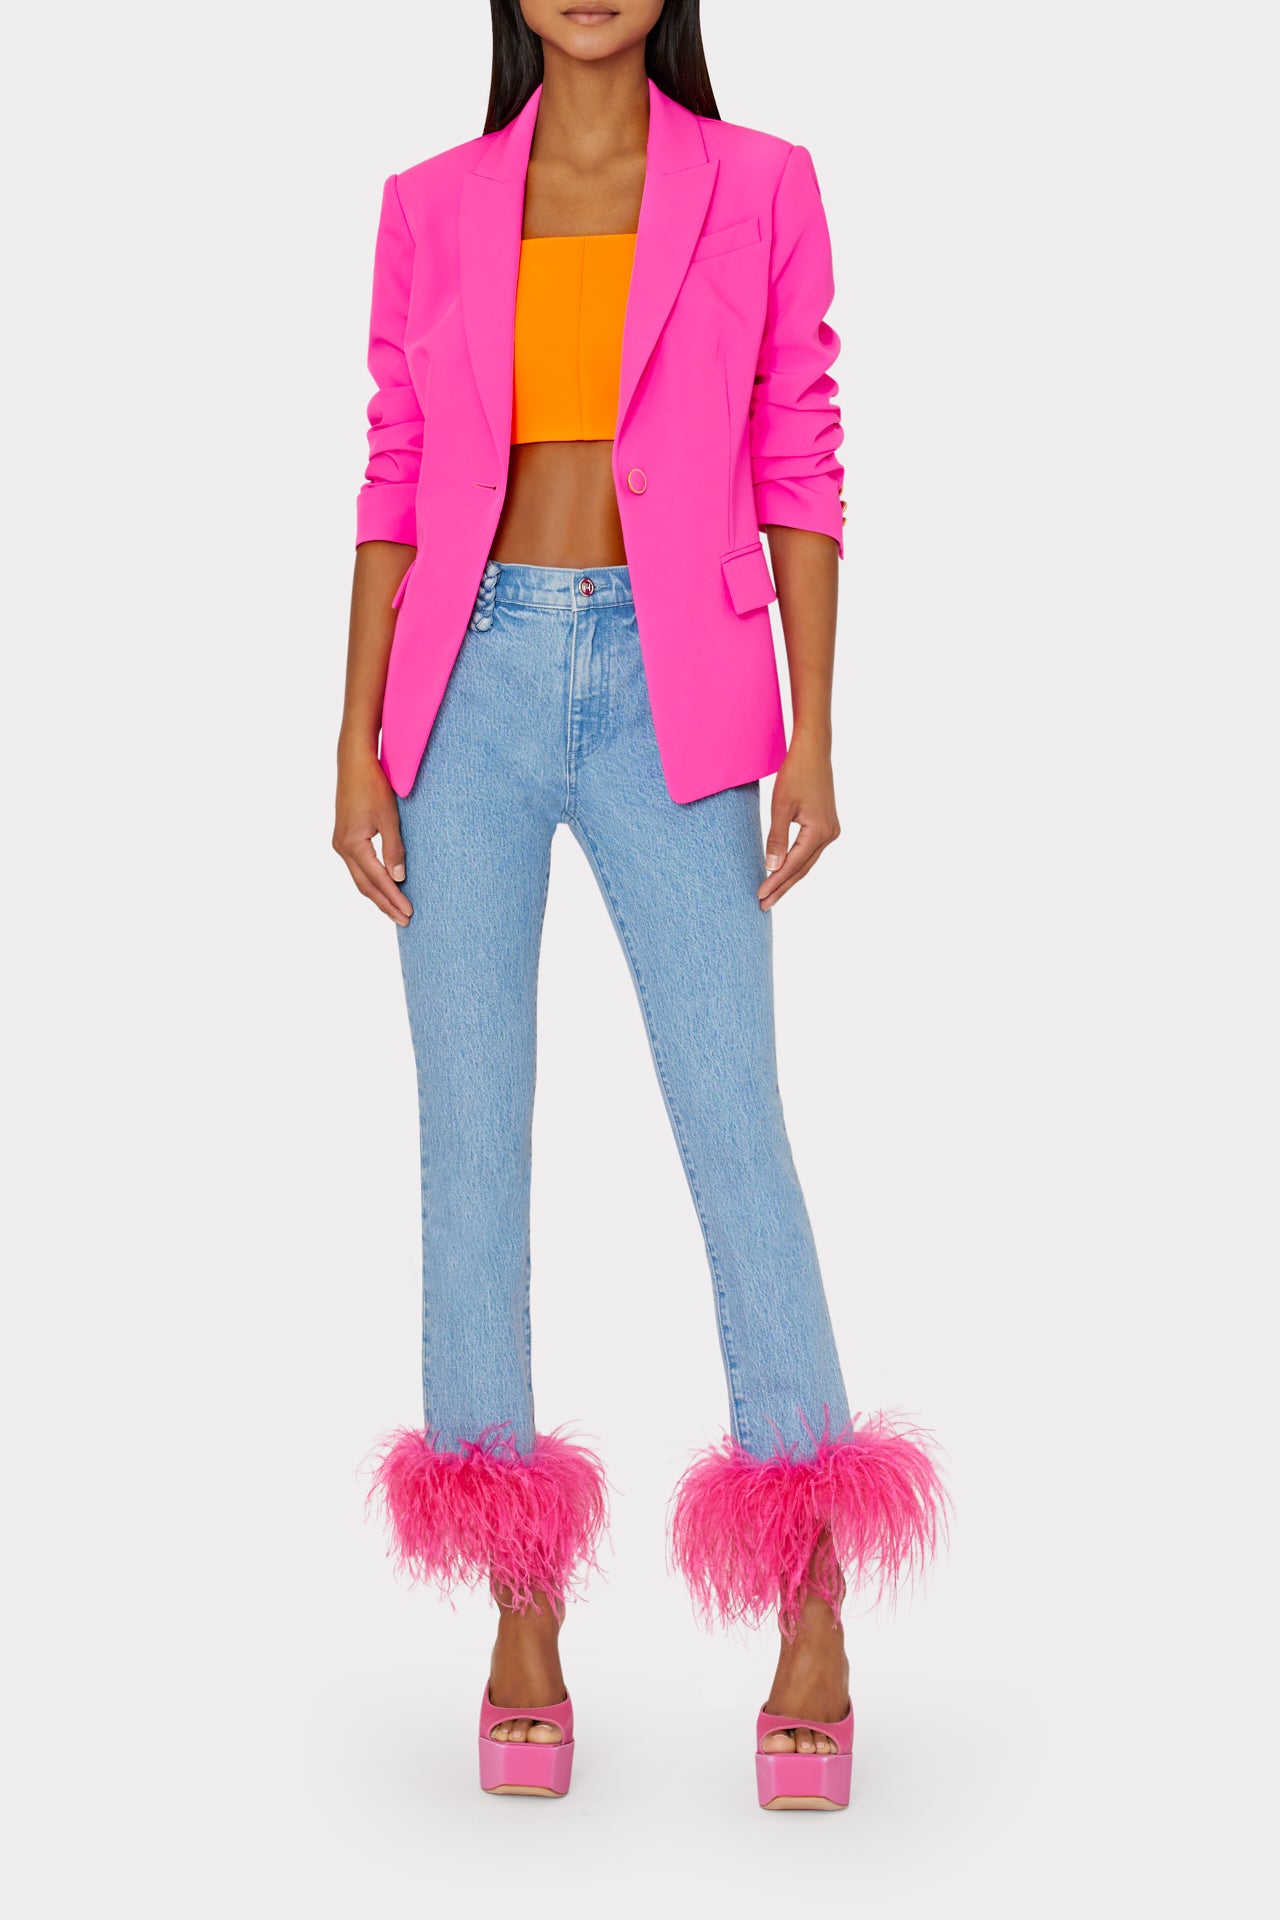 Gale Skinny Feather Jean